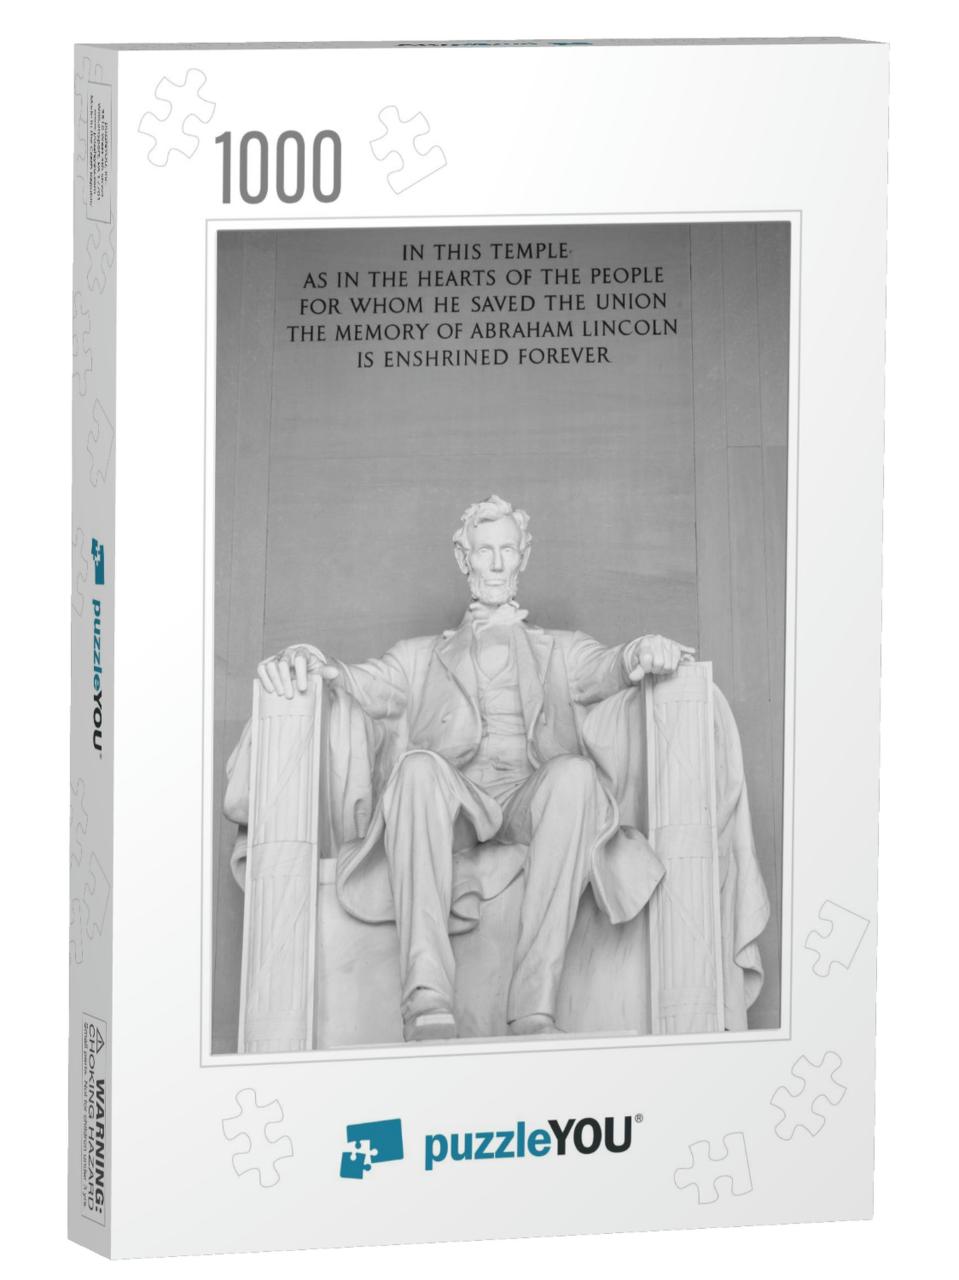 Abraham Lincoln Statue Detail At Lincoln Memorial - Washi... Jigsaw Puzzle with 1000 pieces